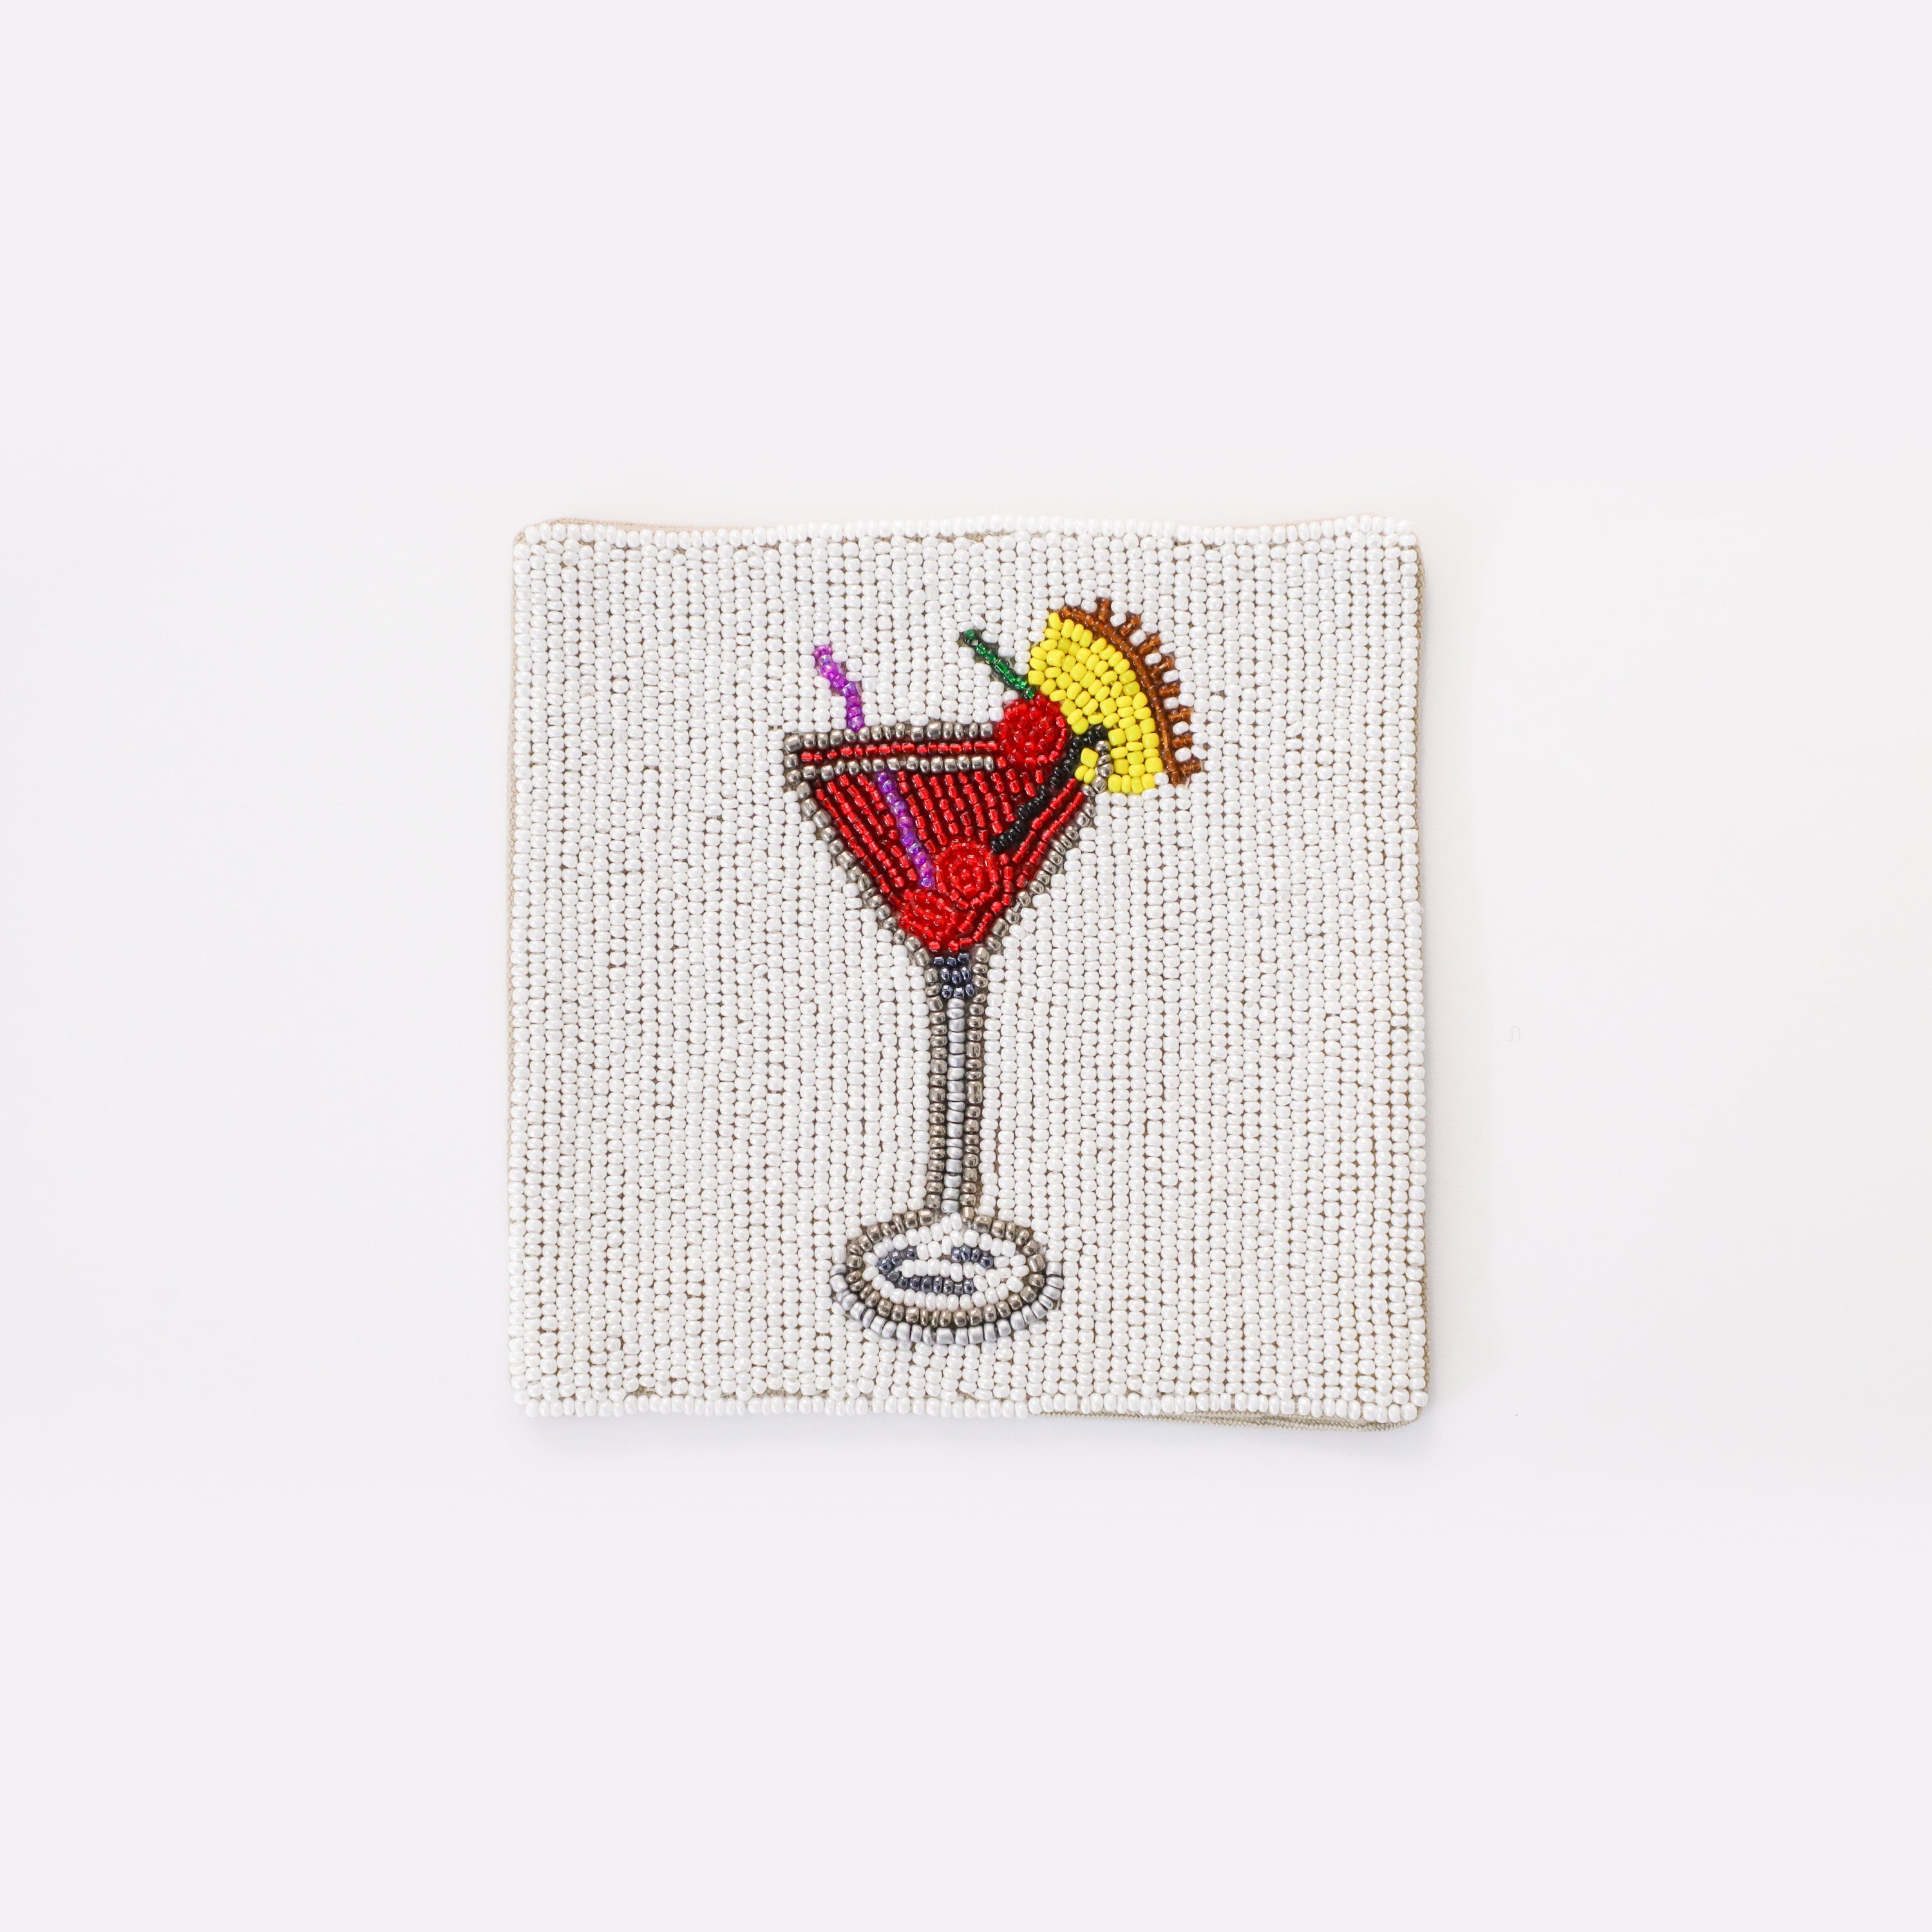 Beaded Drink Coaster, Set of 5 Coasters by Amore Beauté